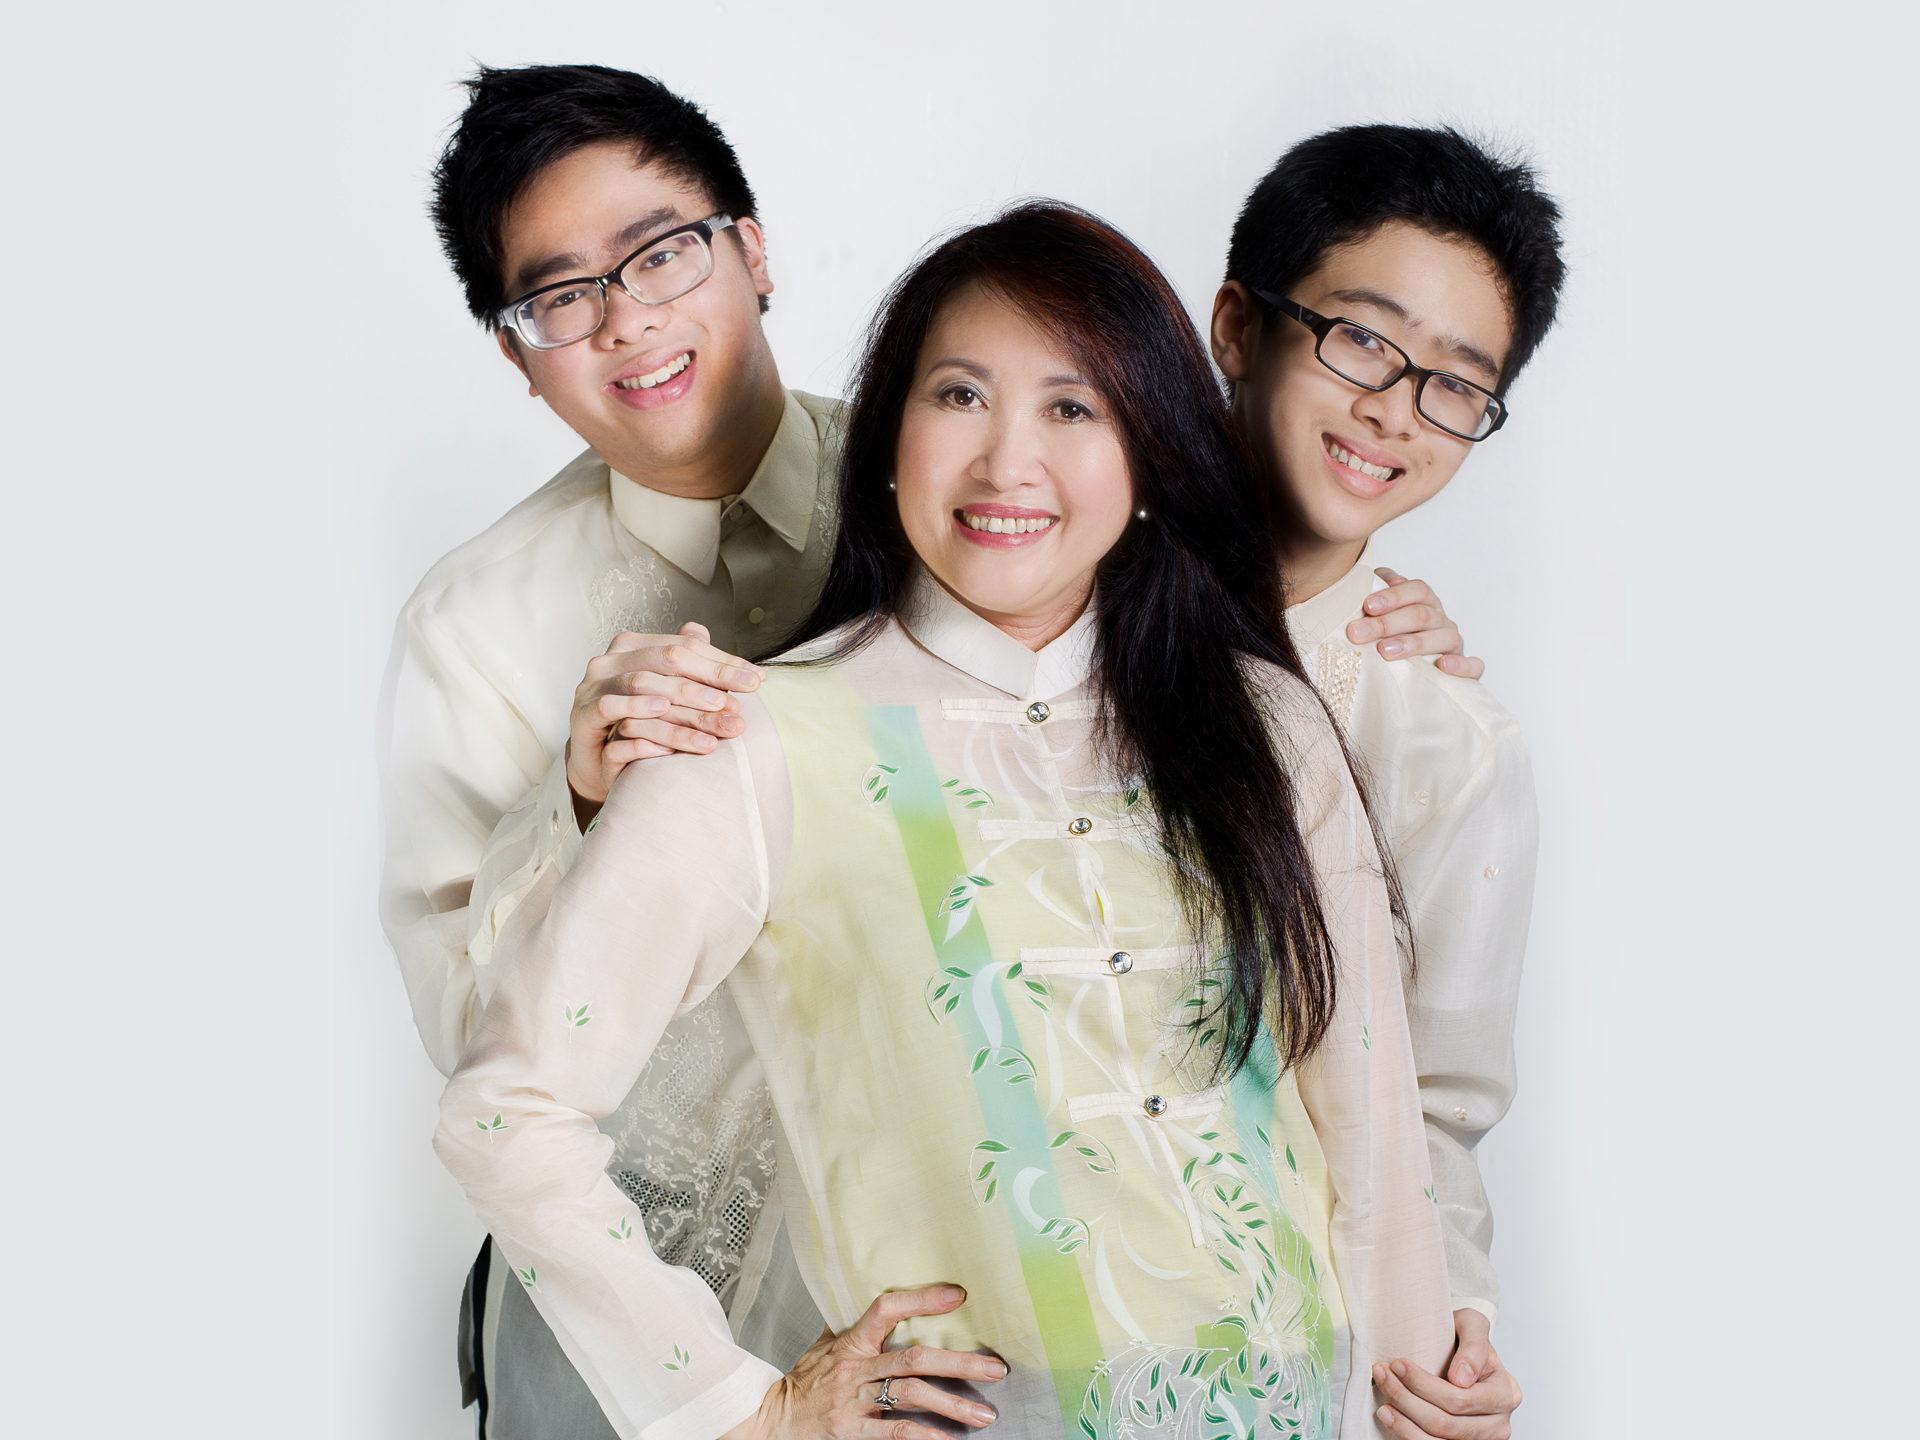 The image shows a mom Ms. Peng So with two sons named Patrick and Angelo wearing Barong Tagalog. Ms. Peng has long hair and her boys wearing eyeglasses.